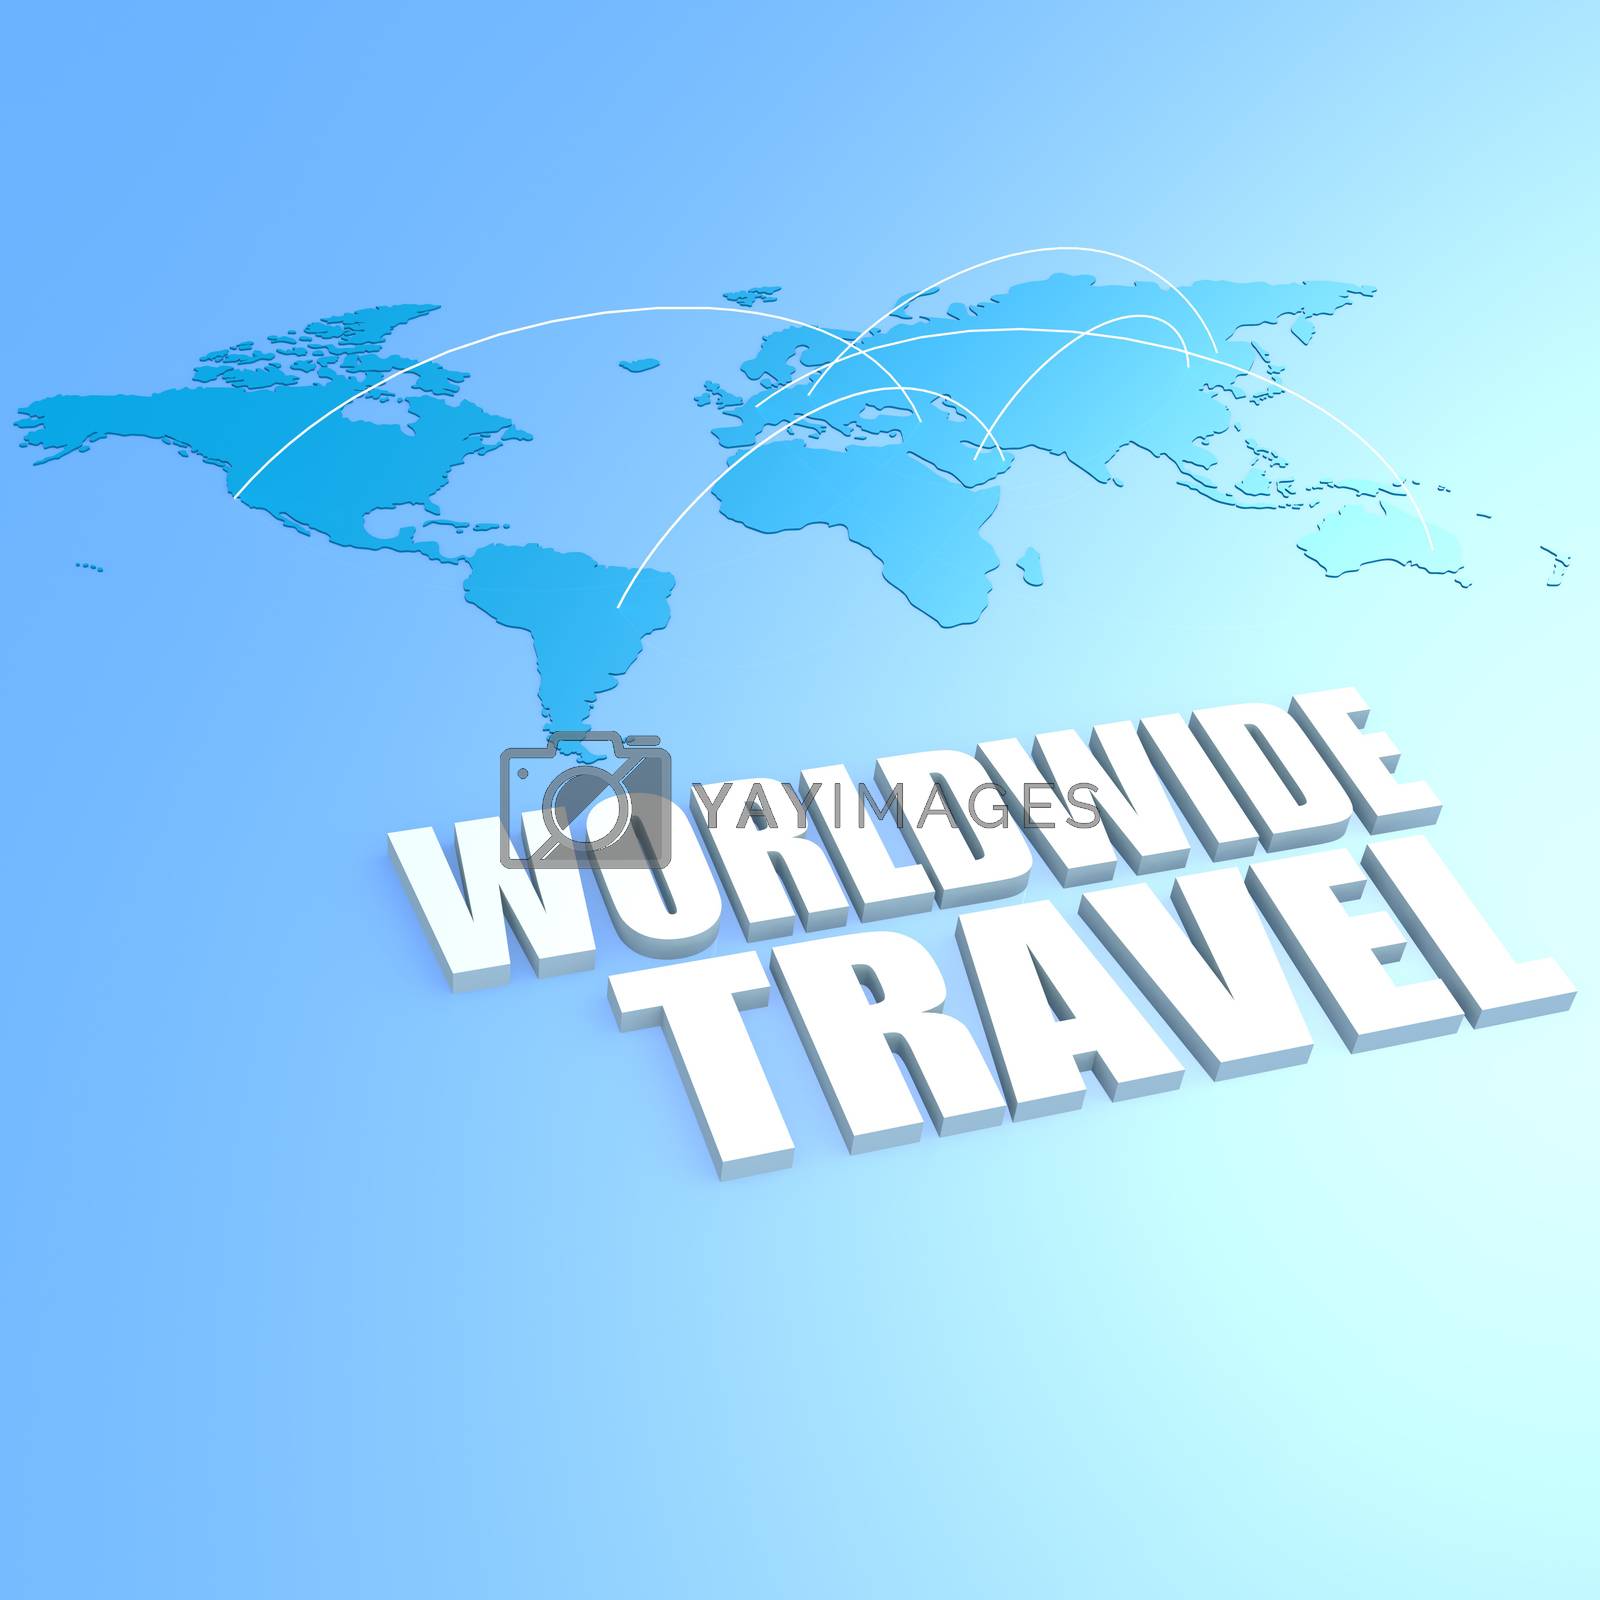 Royalty free image of Worldwide travel world map by tang90246